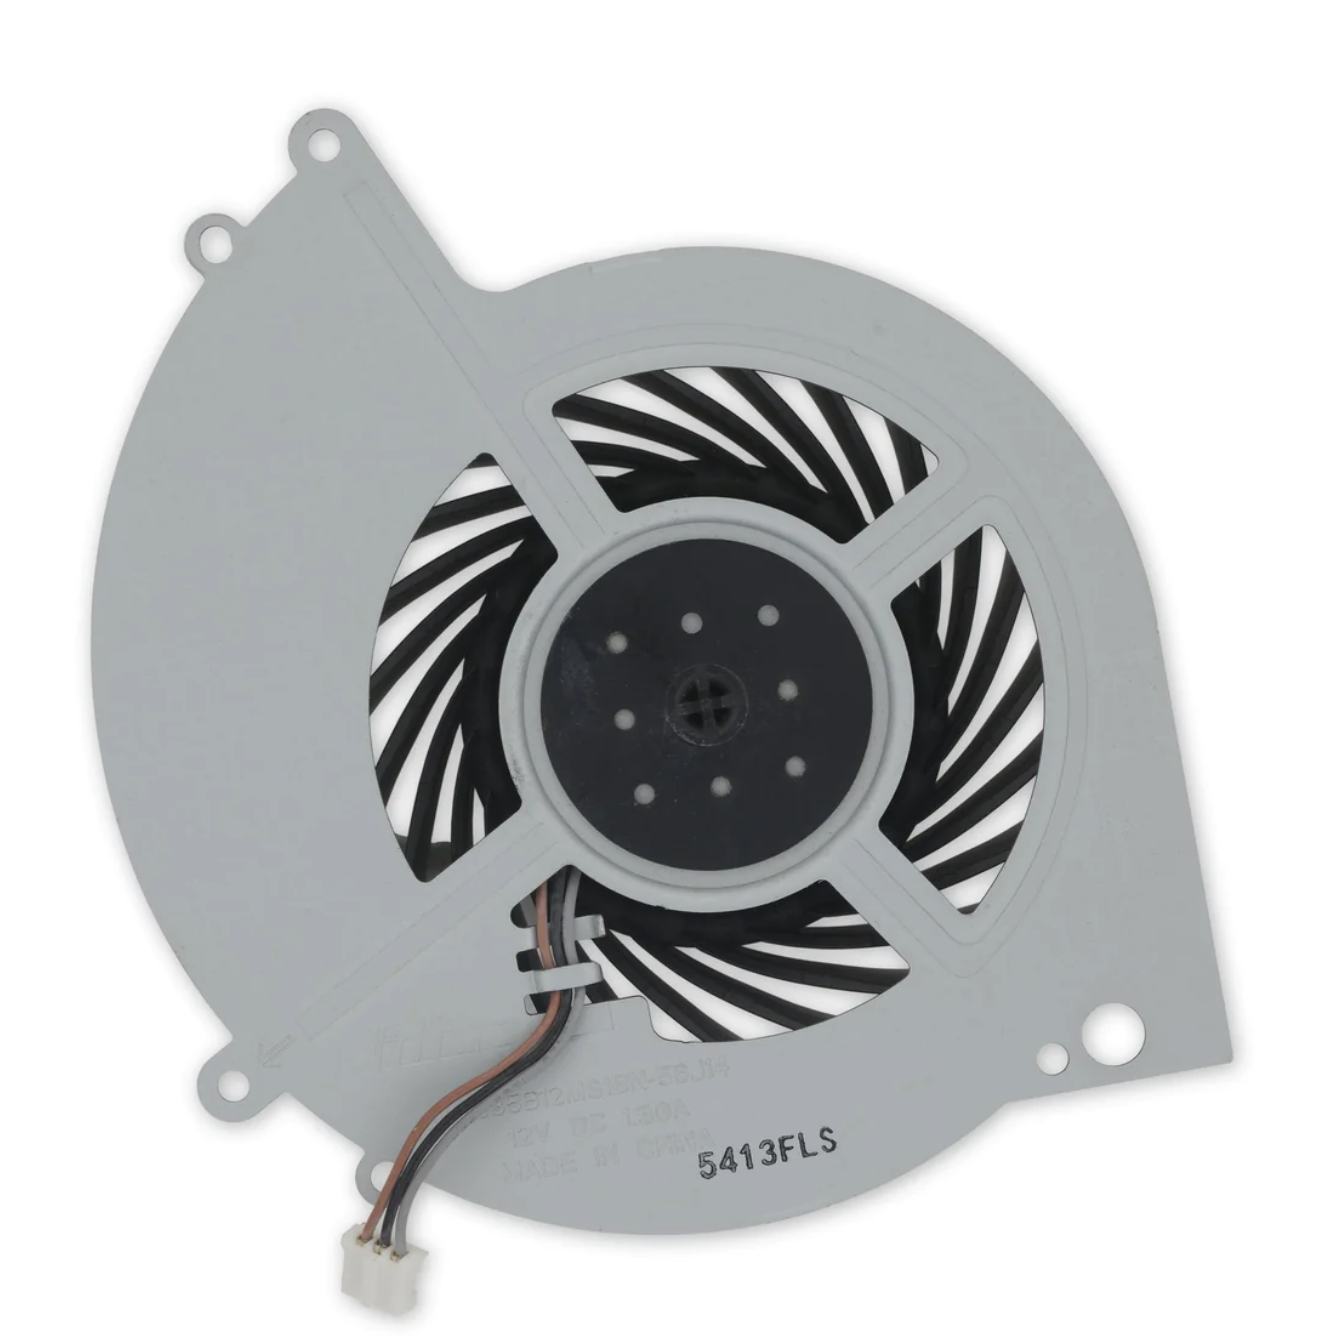 NEW OEM Sony PlayStation 4 PS4 CUH-1215A Internal Cooling Fan PS4 12XX